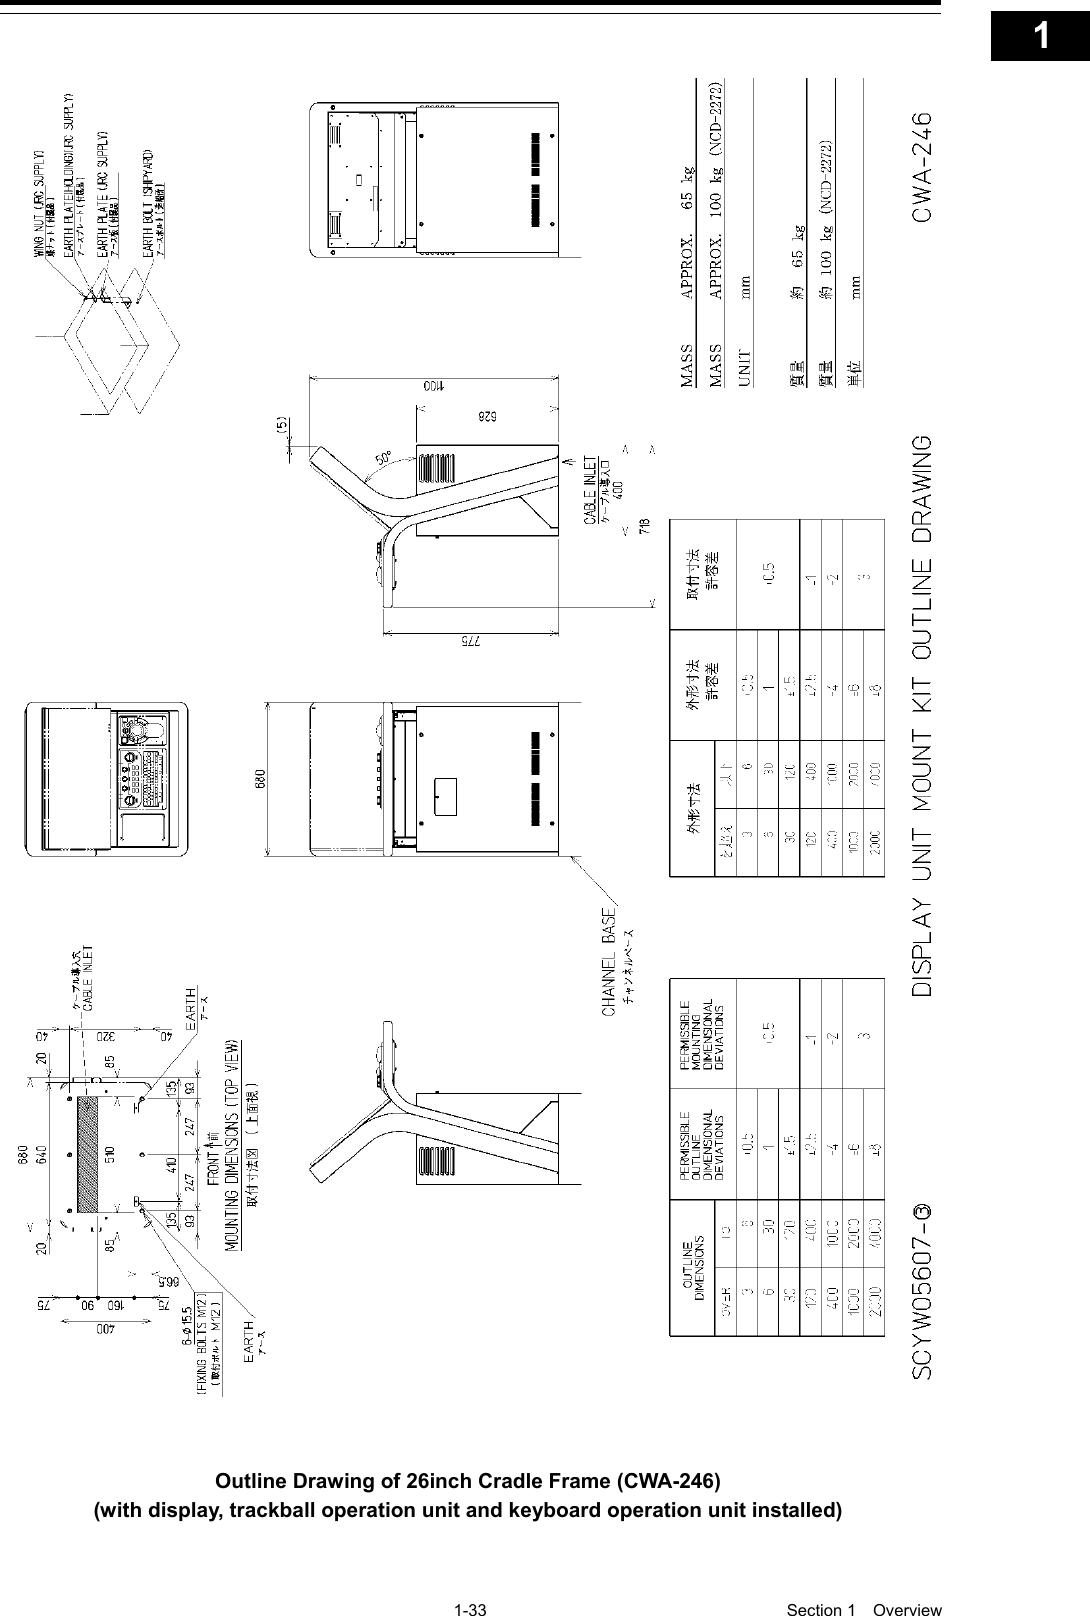   1-33  Section 1  Overview    1  2  3  4  5  6  7  8  9  10  11  12  13  14  15  16  17  18  19  20  21  22  23  24  25  26  27  付録       Outline Drawing of 26inch Cradle Frame (CWA-246) (with display, trackball operation unit and keyboard operation unit installed)     